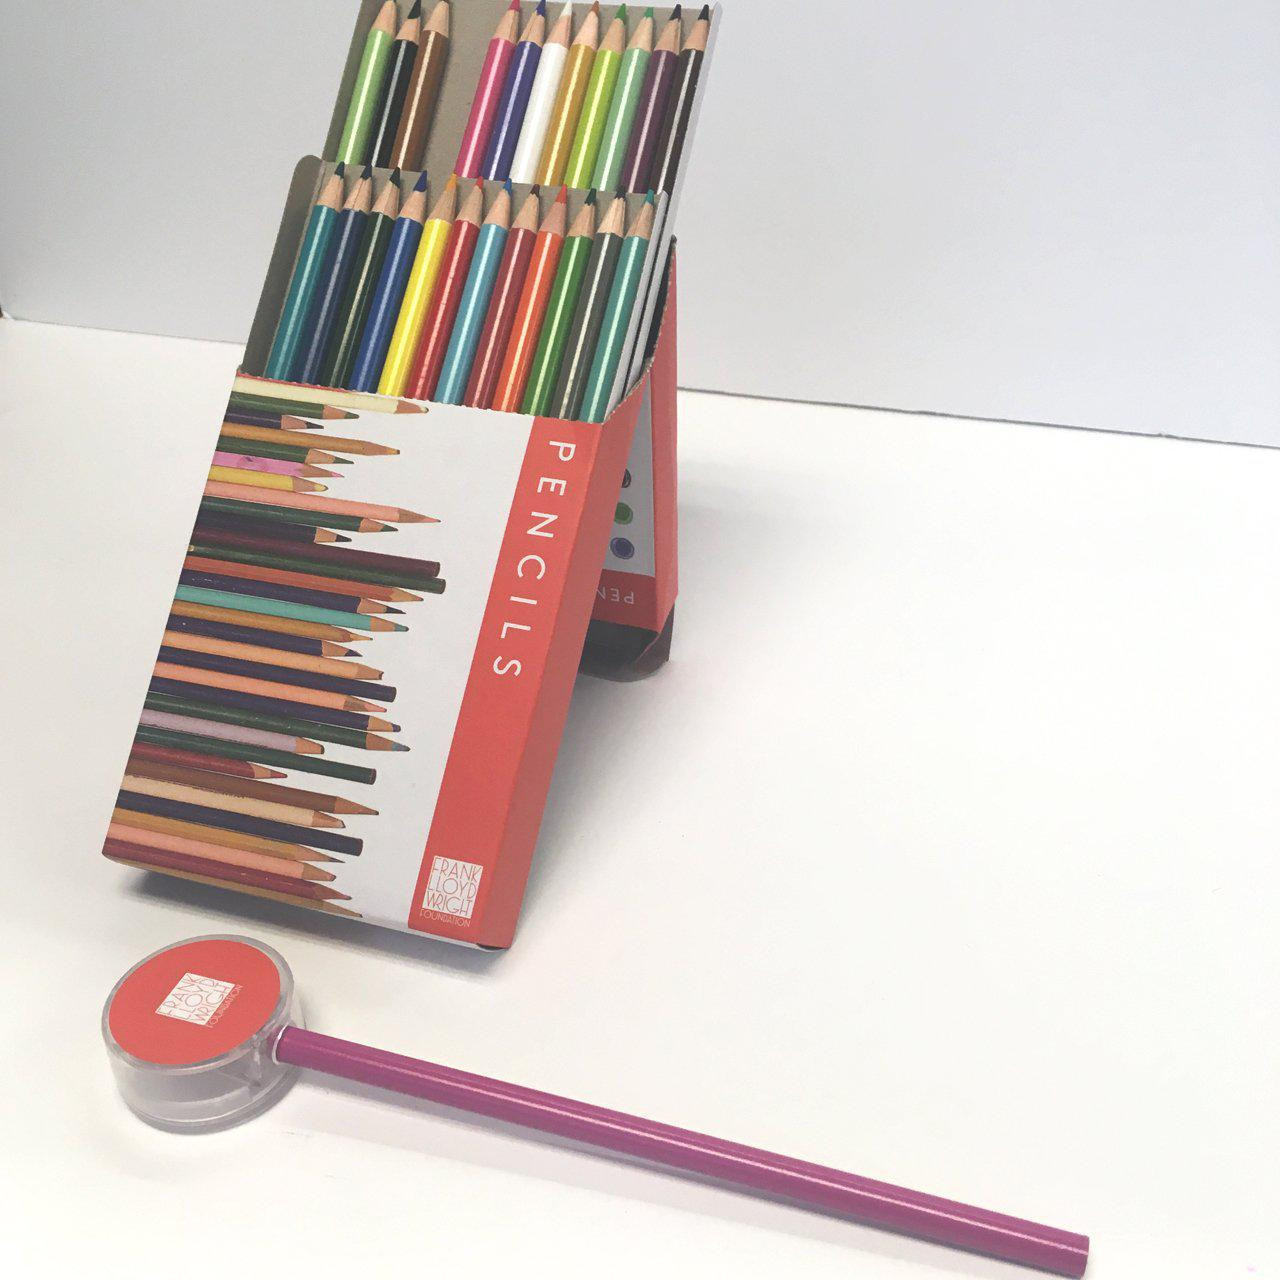 Frank Lloyd Wright Colored Pencils with Sharpener Novelty Book - The Shop  at Strathmore